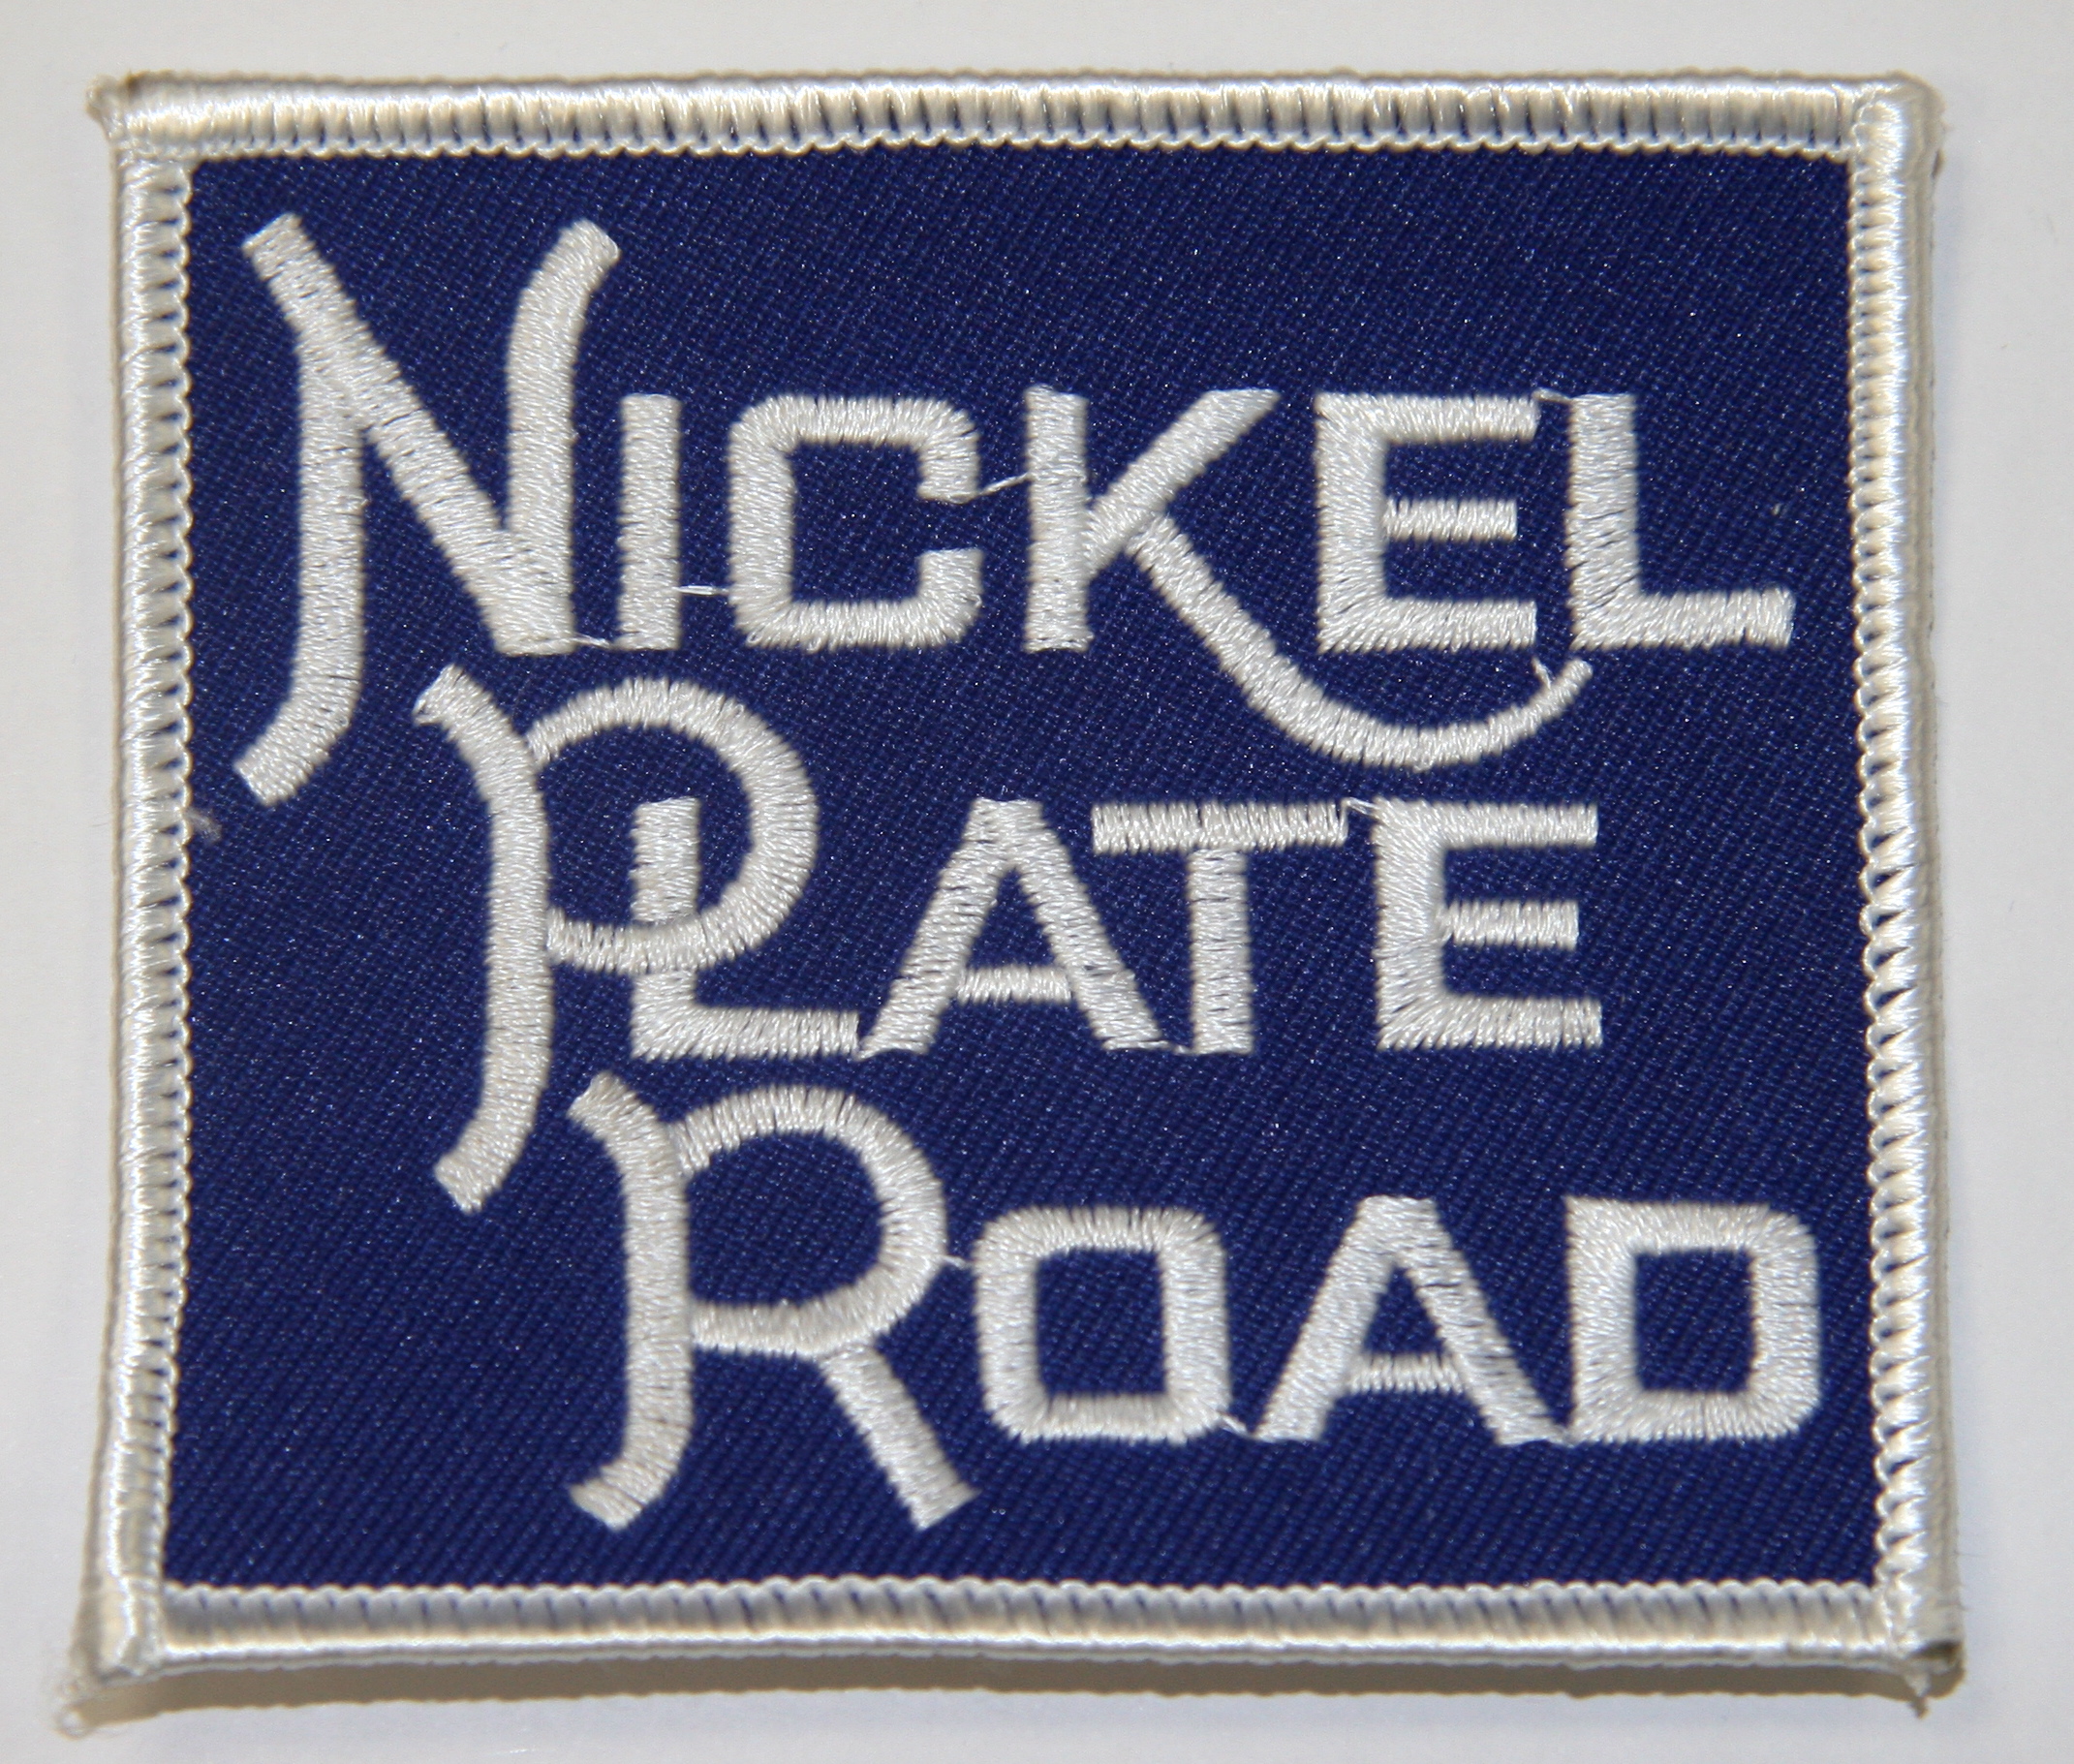 Nickel Plate Road Patch - A-Trains.com